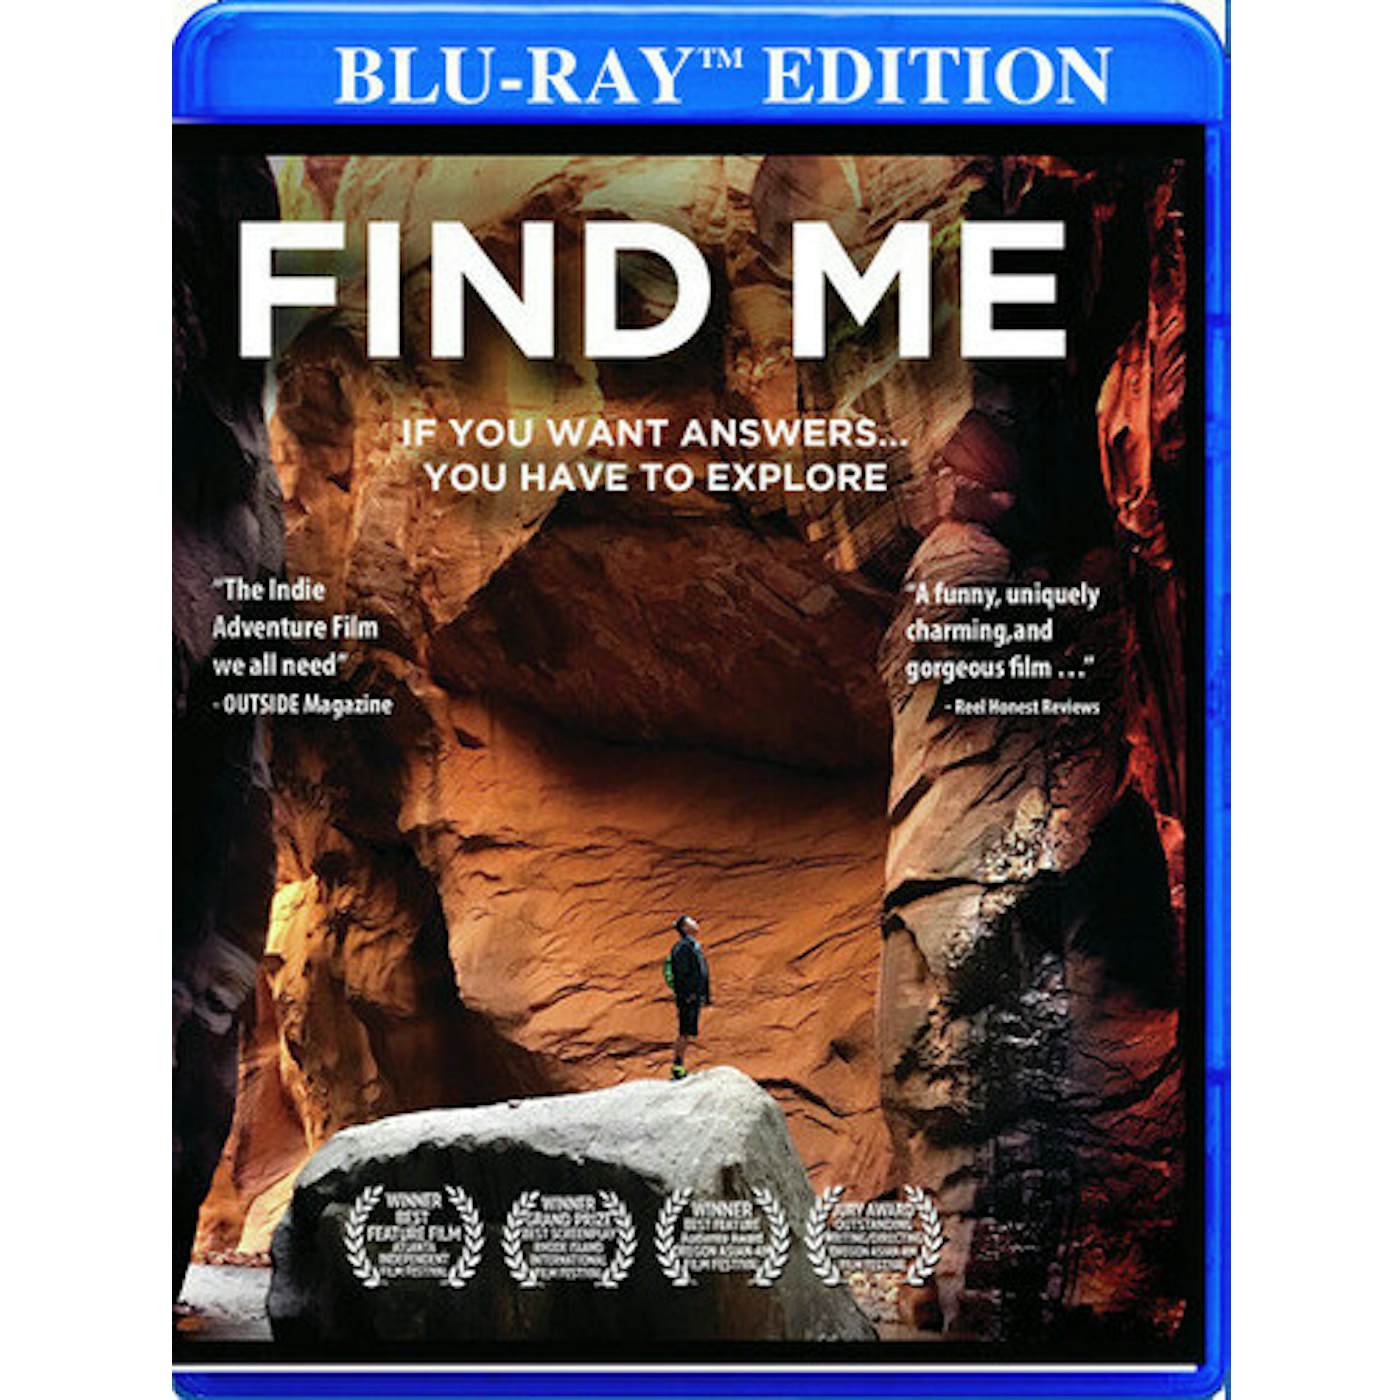 FIND ME Blu-ray